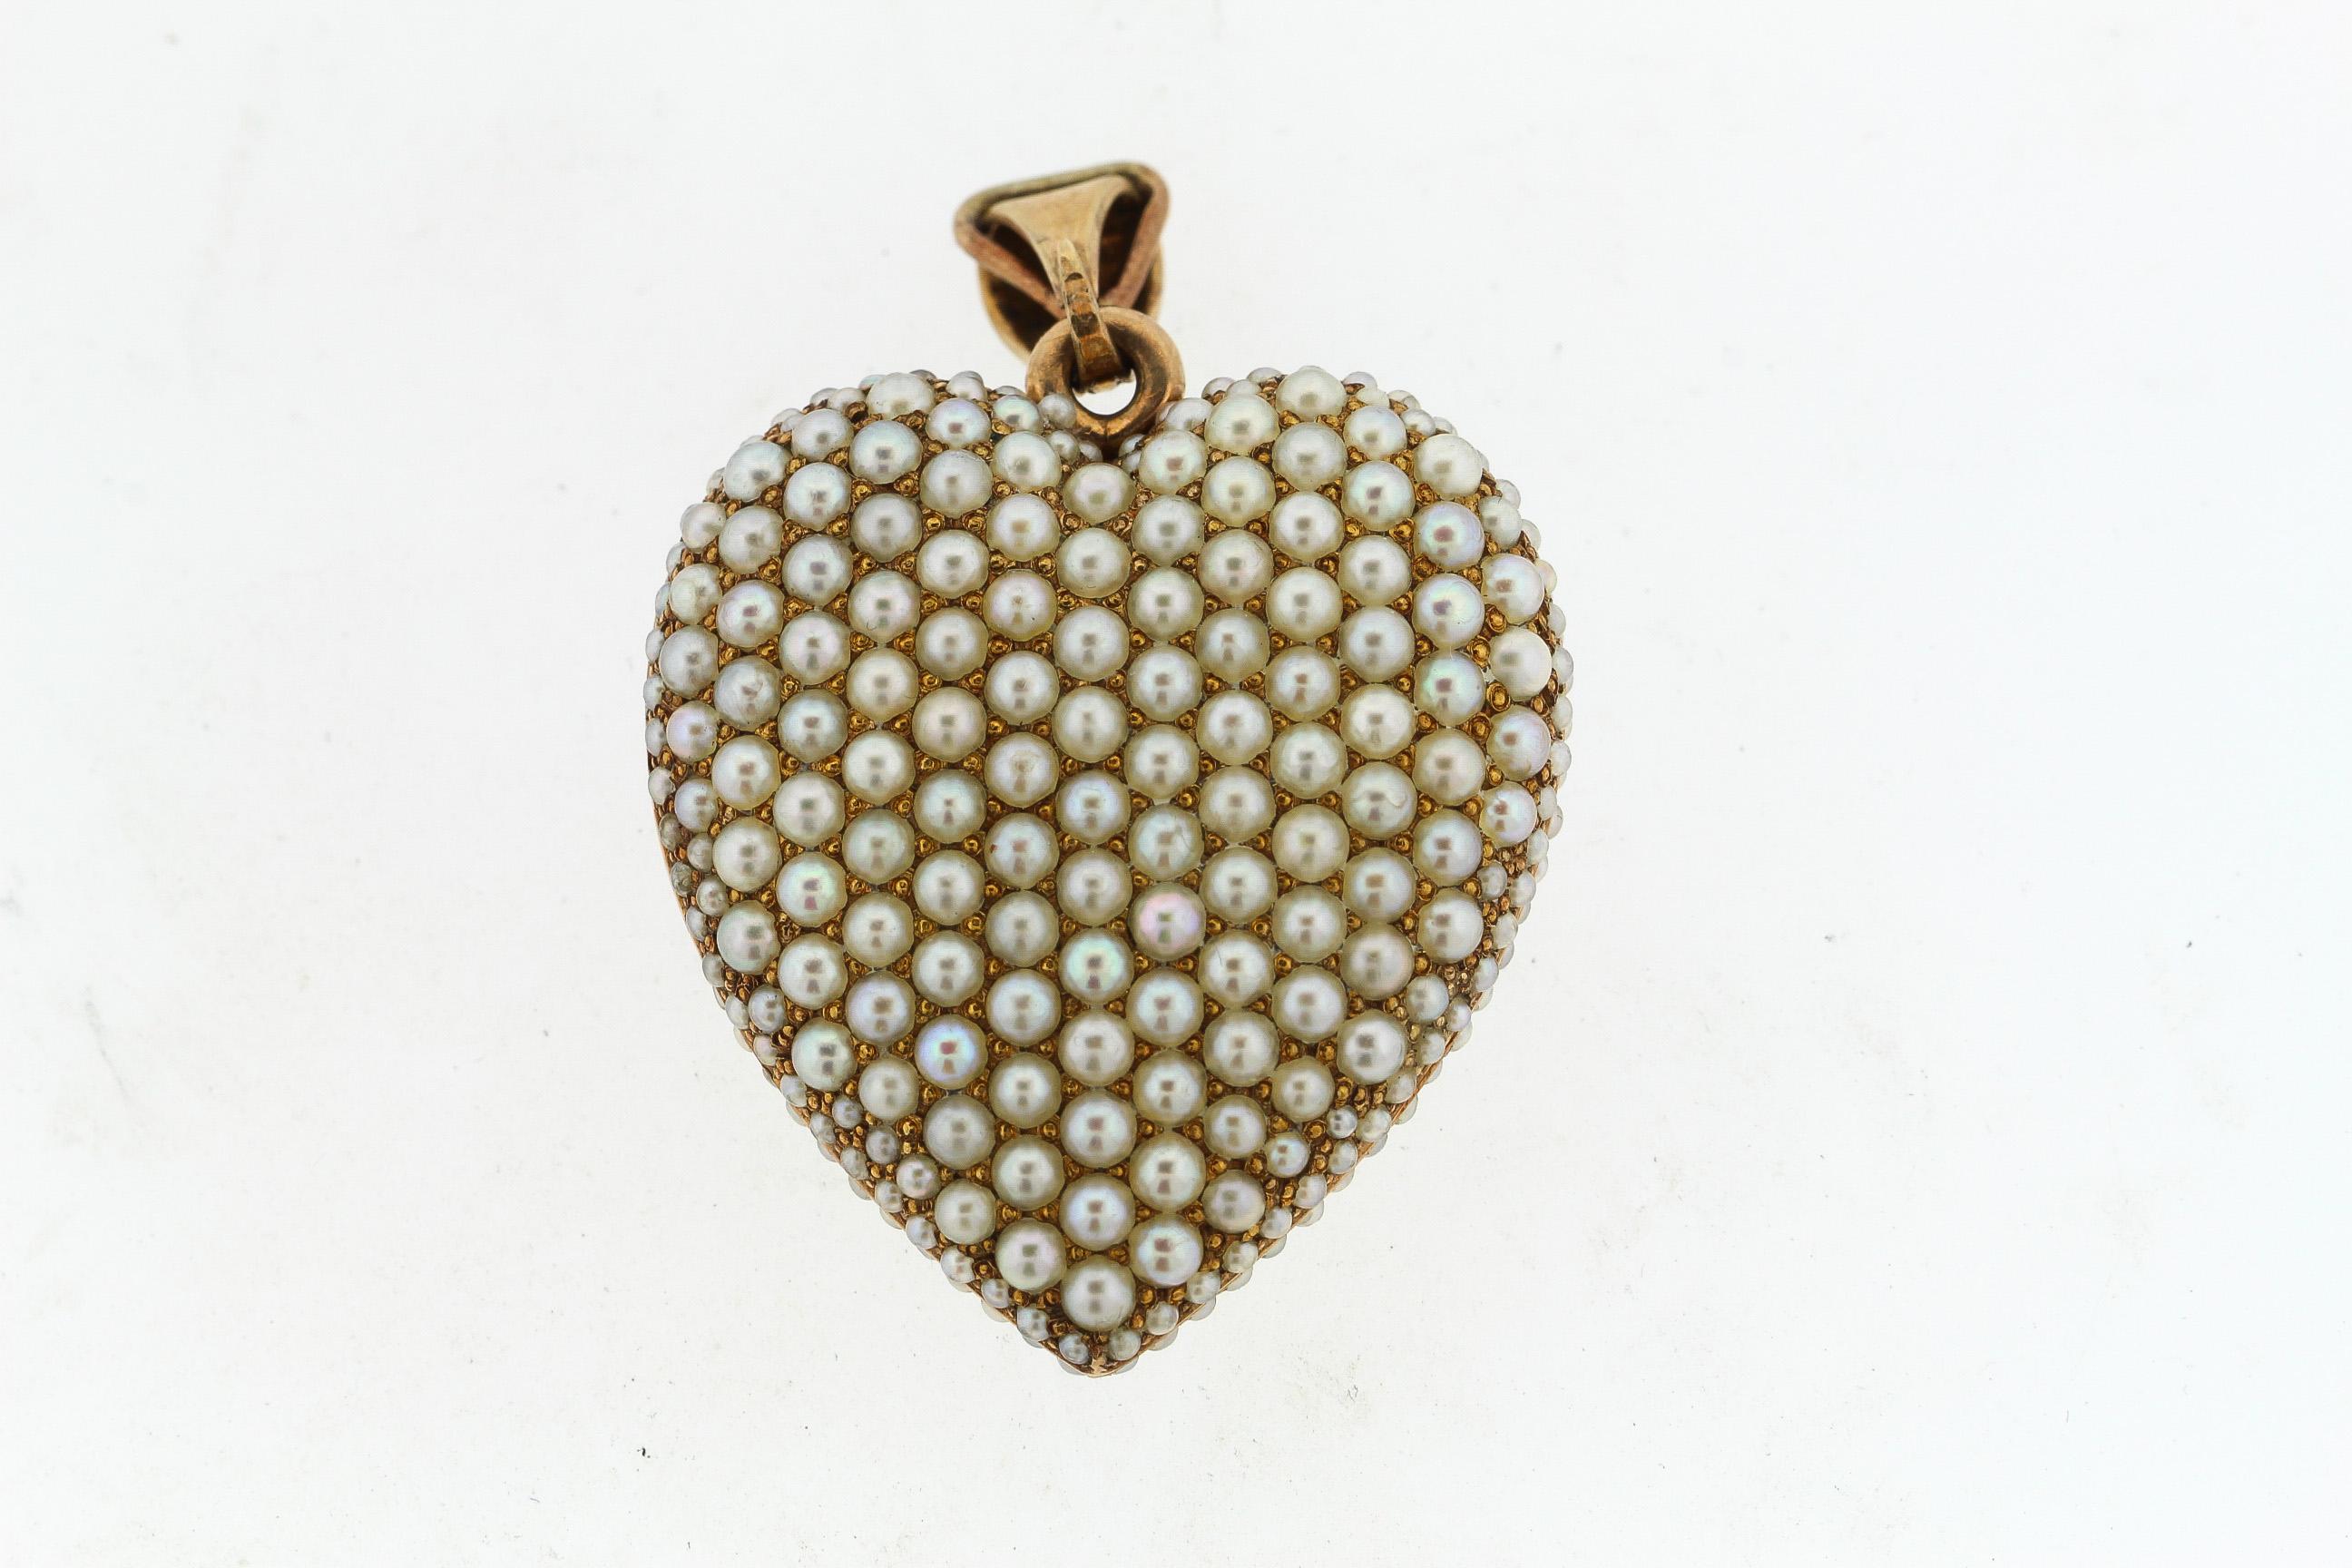 A beautiful antique 14k yellow gold white seed pearl heart locket, circa 1880. A wonderful example of such a locket, the seed pearls “pavee” the front and back of the locket. It opens and has the original crystal inside where a memento of hair or